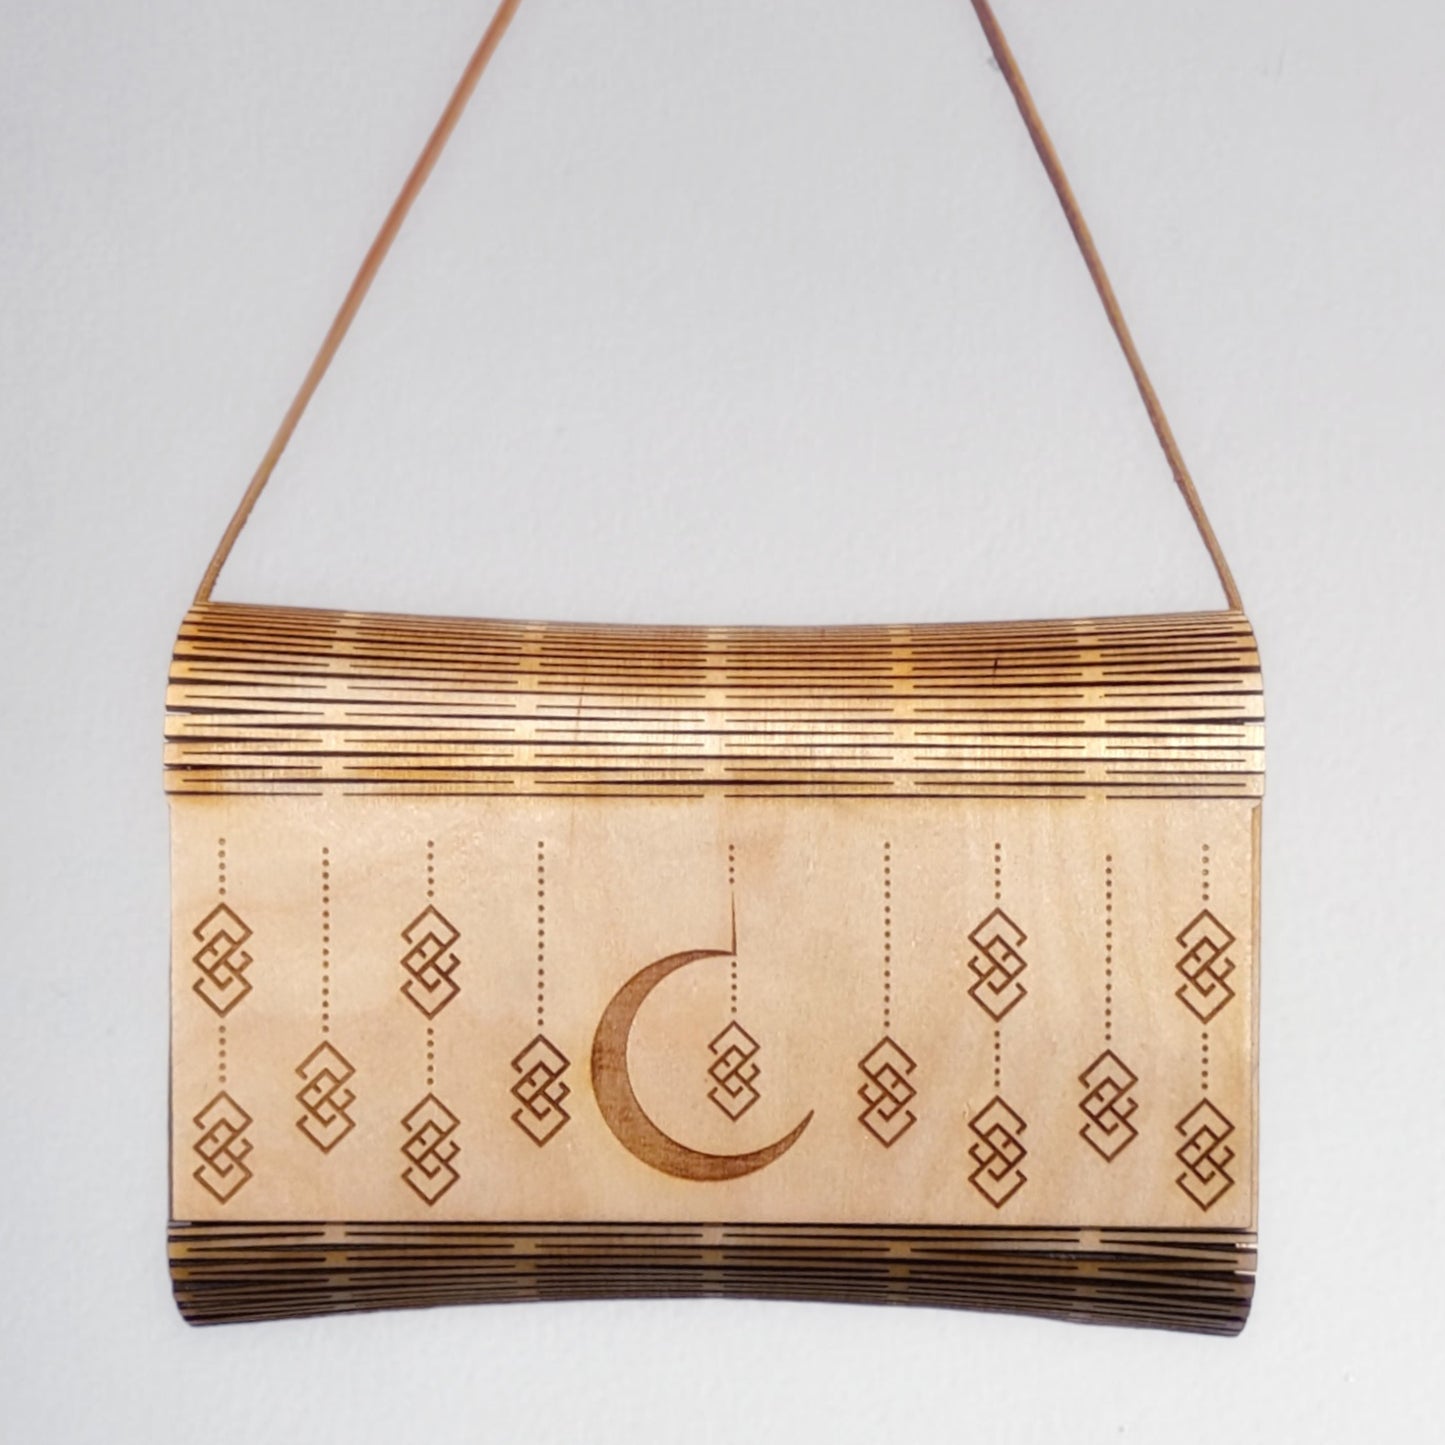 Geometric Moon Wood Purse Handbag Clutch with Optional Strap-Witchy Woman Gift